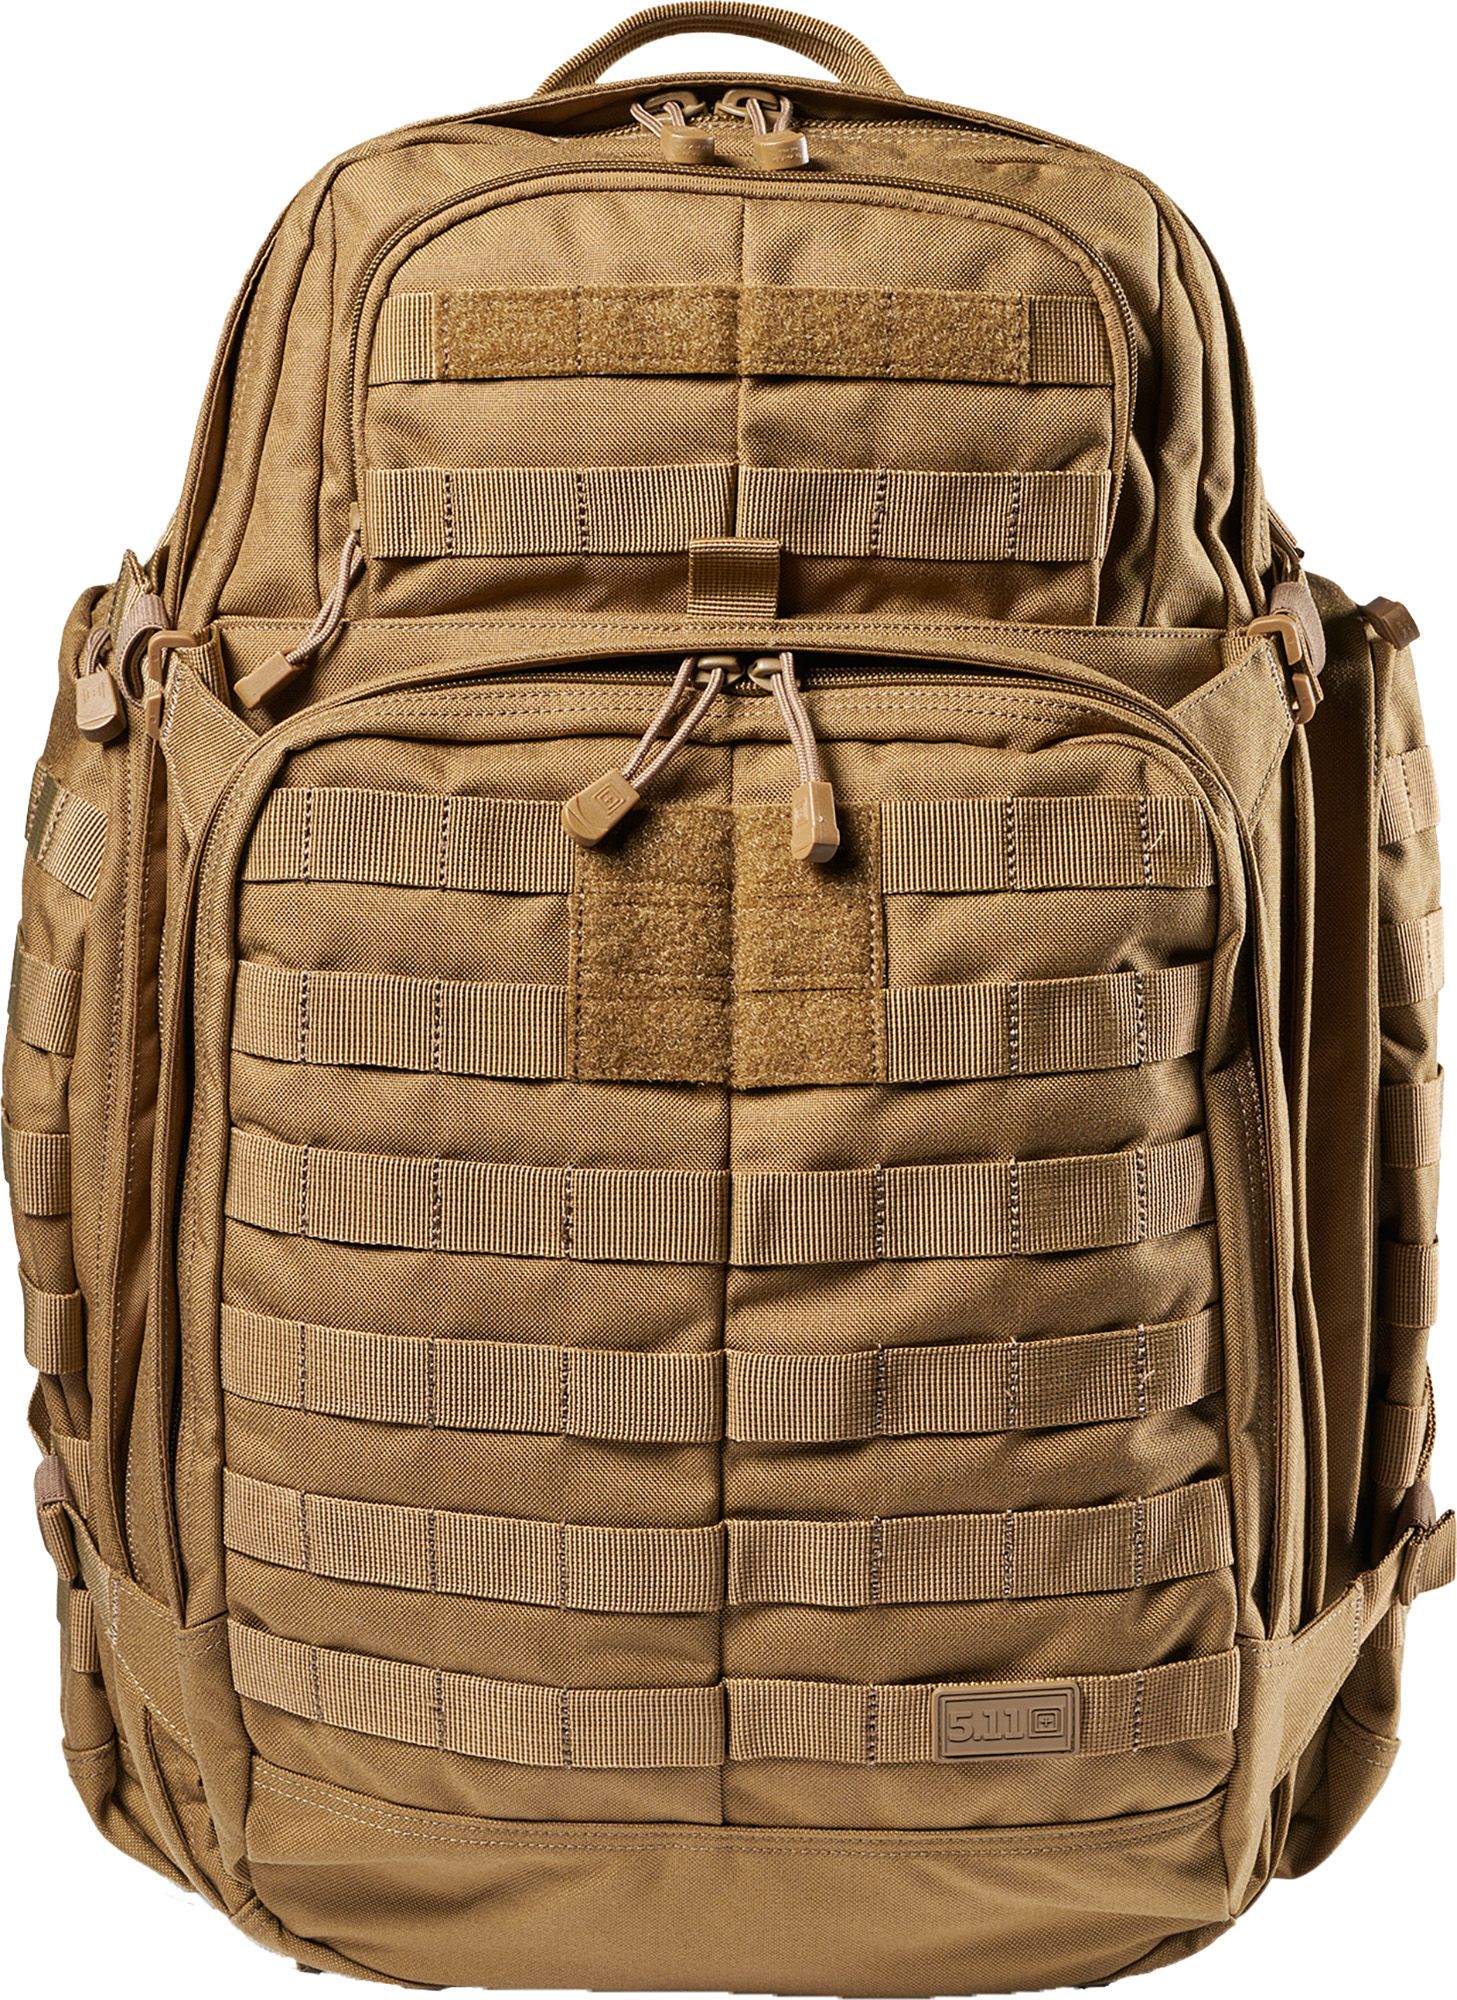 5.11 Tactical Rush72 2.0 55L Backpack